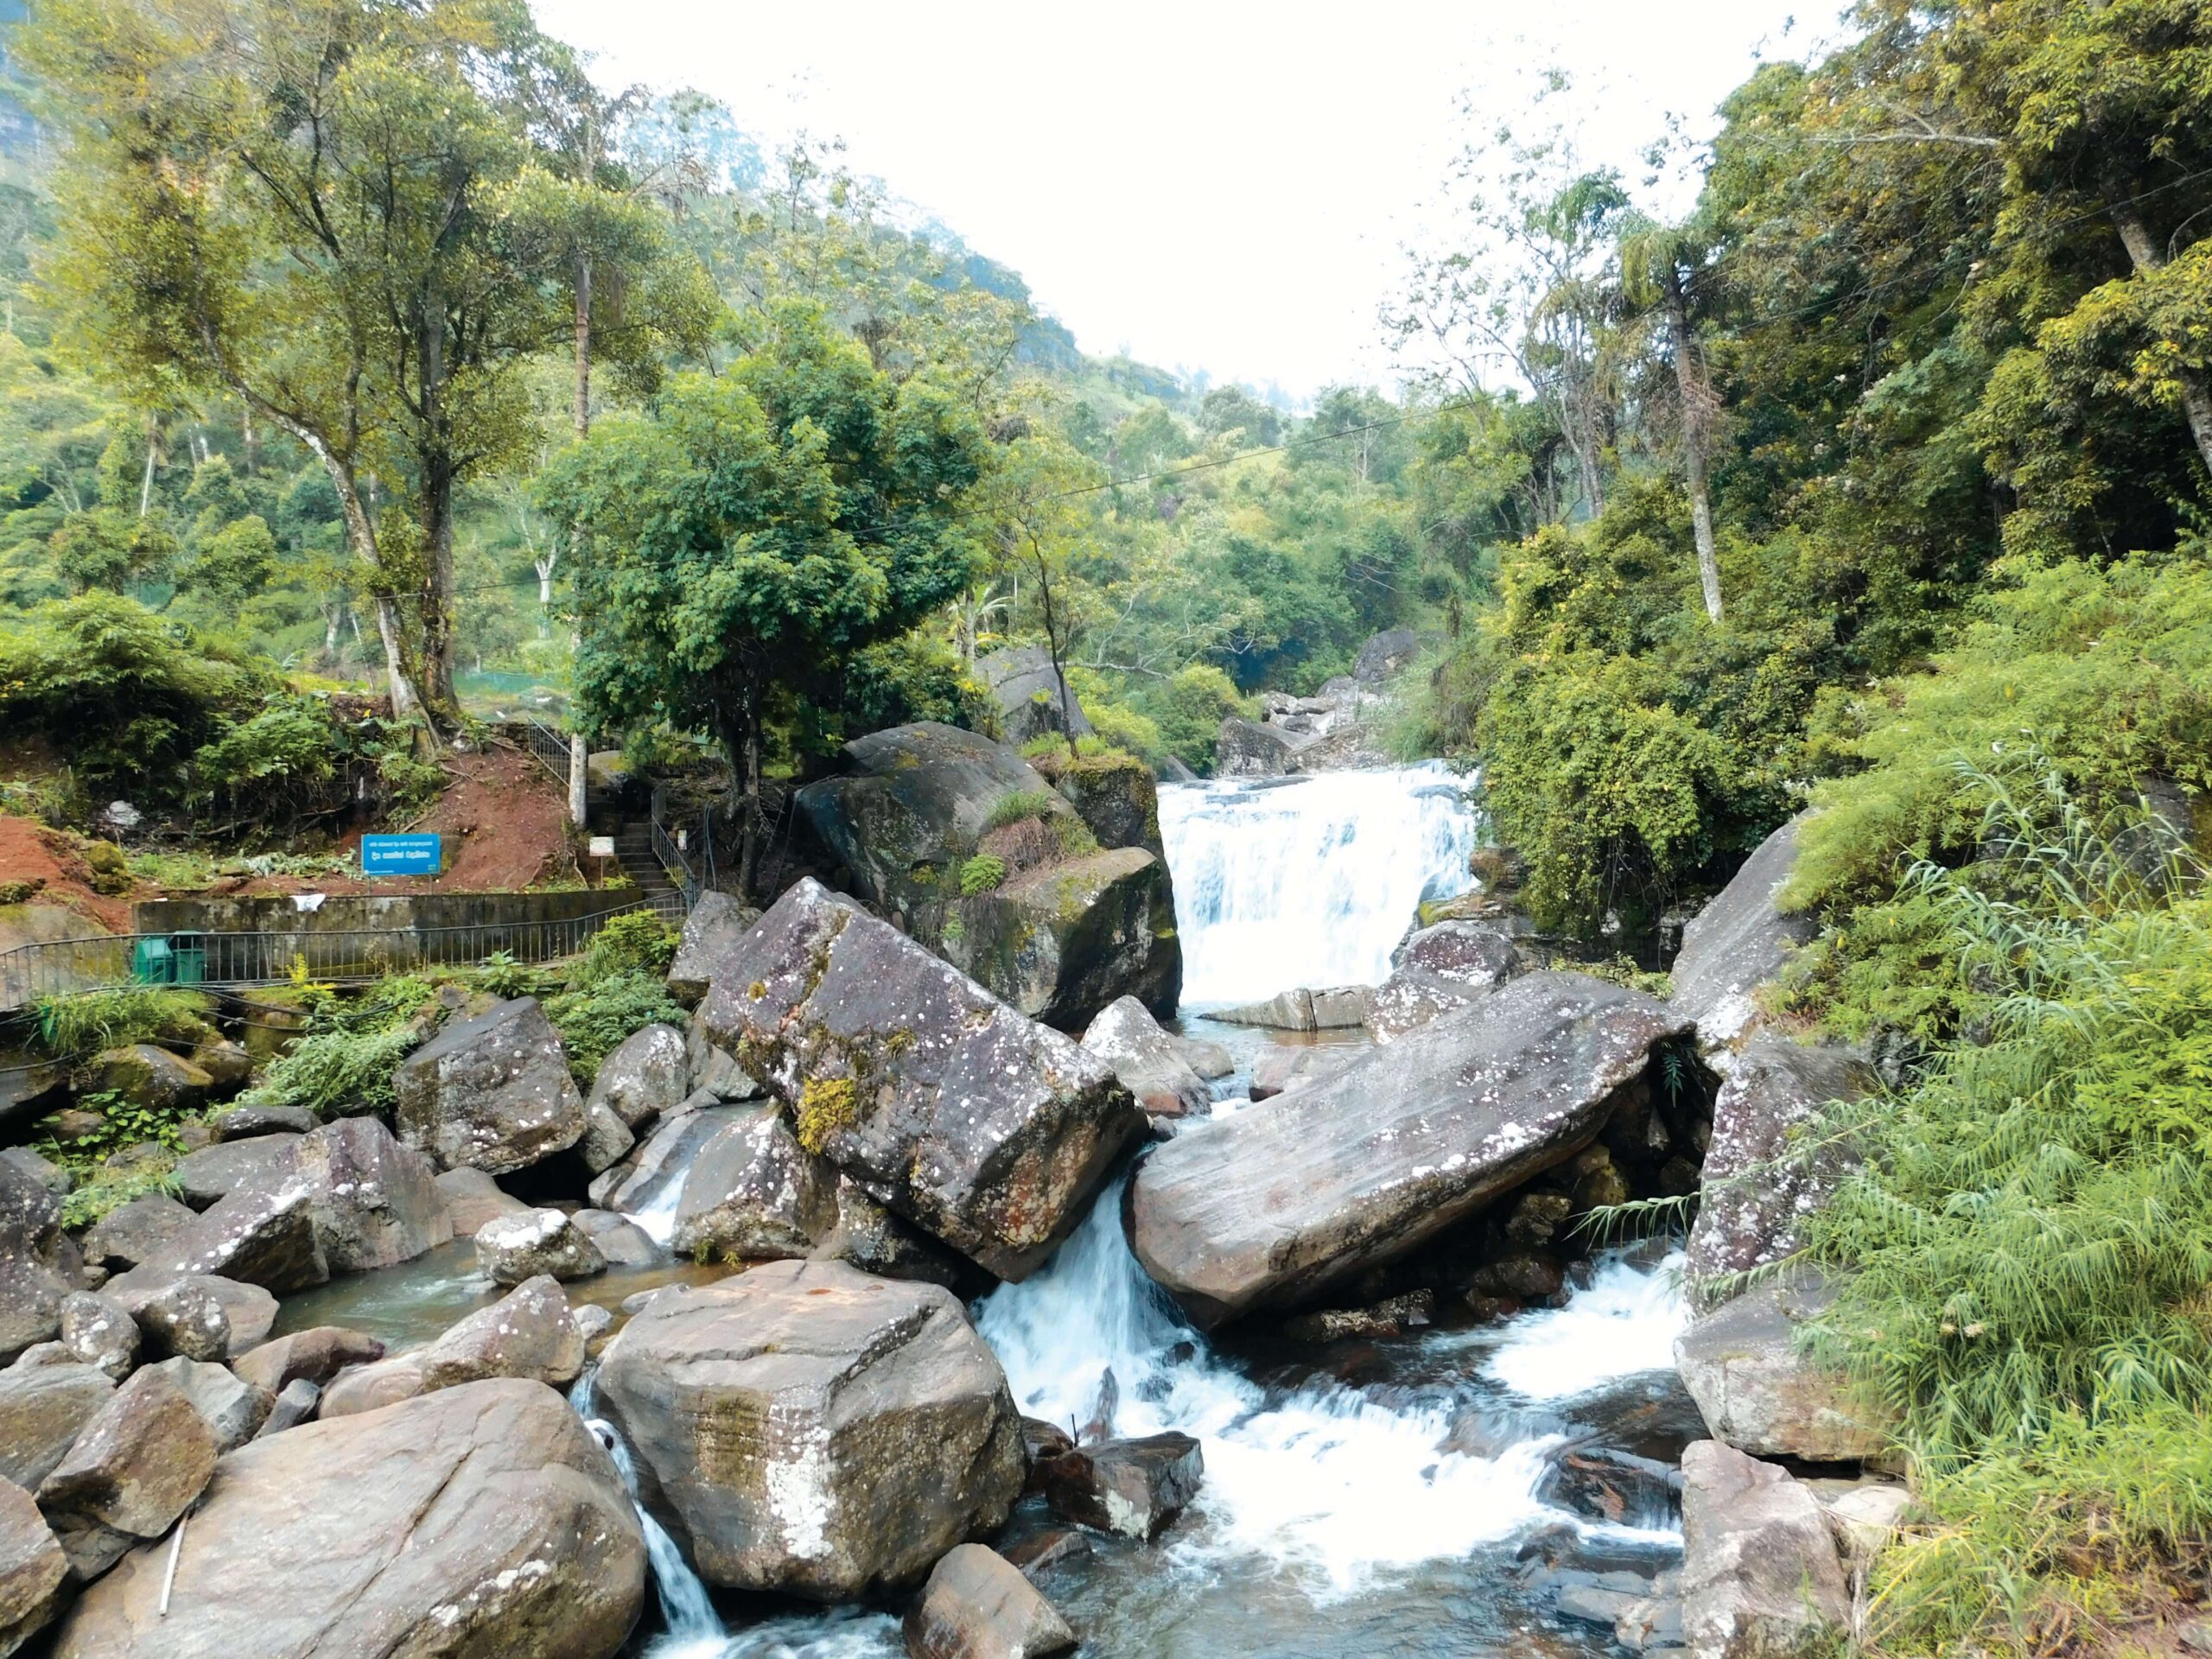 The spectacular Ramboda waterfalls descend from a height of a 109 meters and streams down through the Seetha Eliyaregion